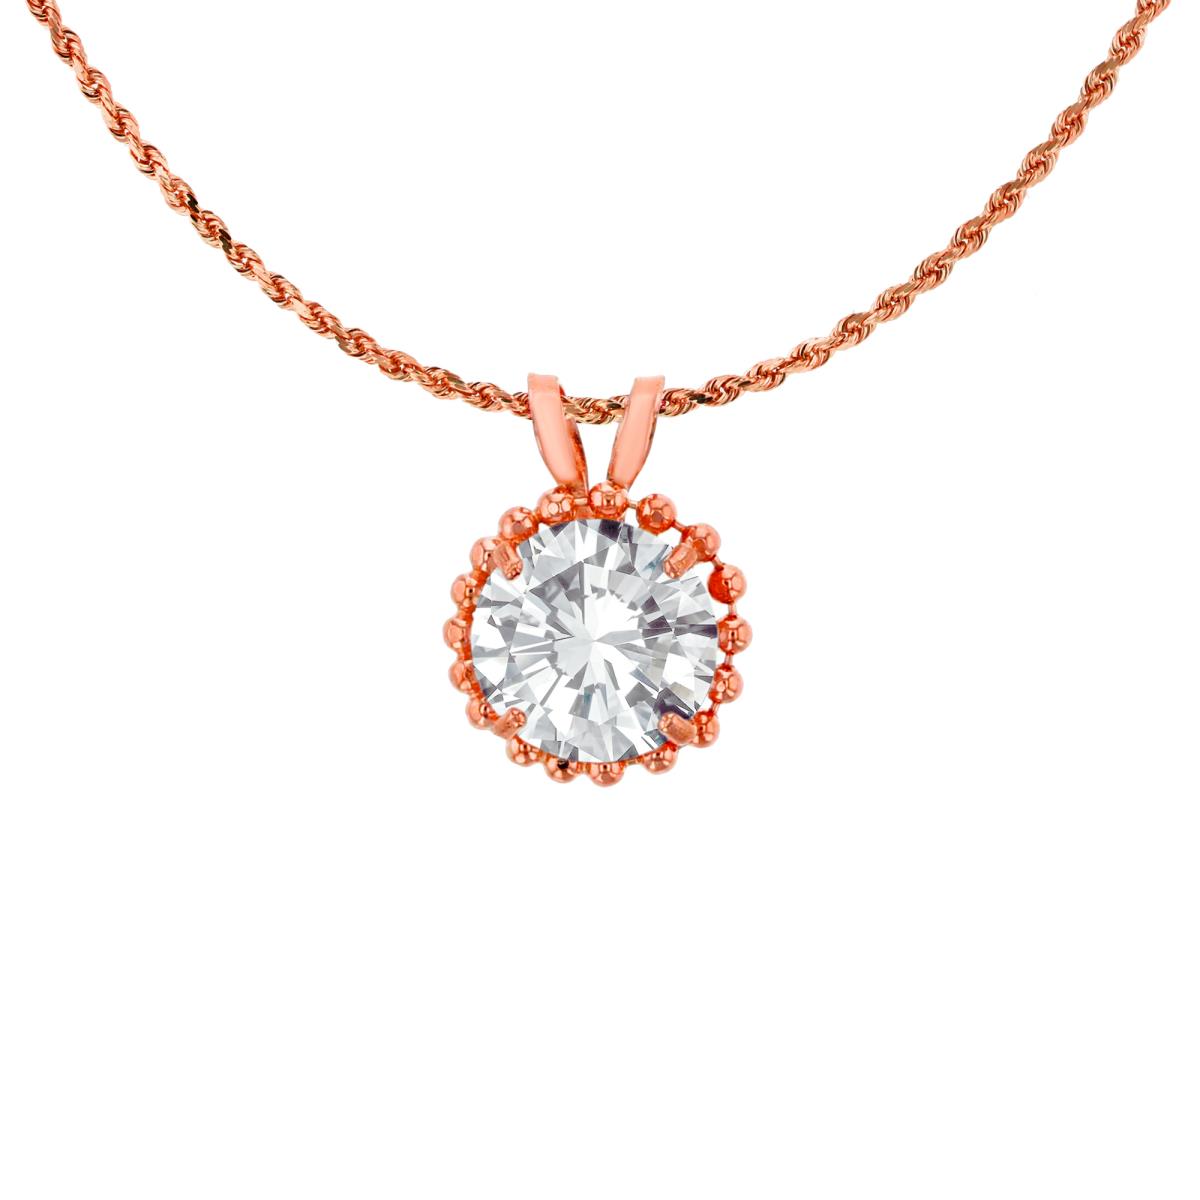 10K Rose Gold 6mm Rd Cut White Topaz with Bead Frame Rabbit Ear 18" Necklace